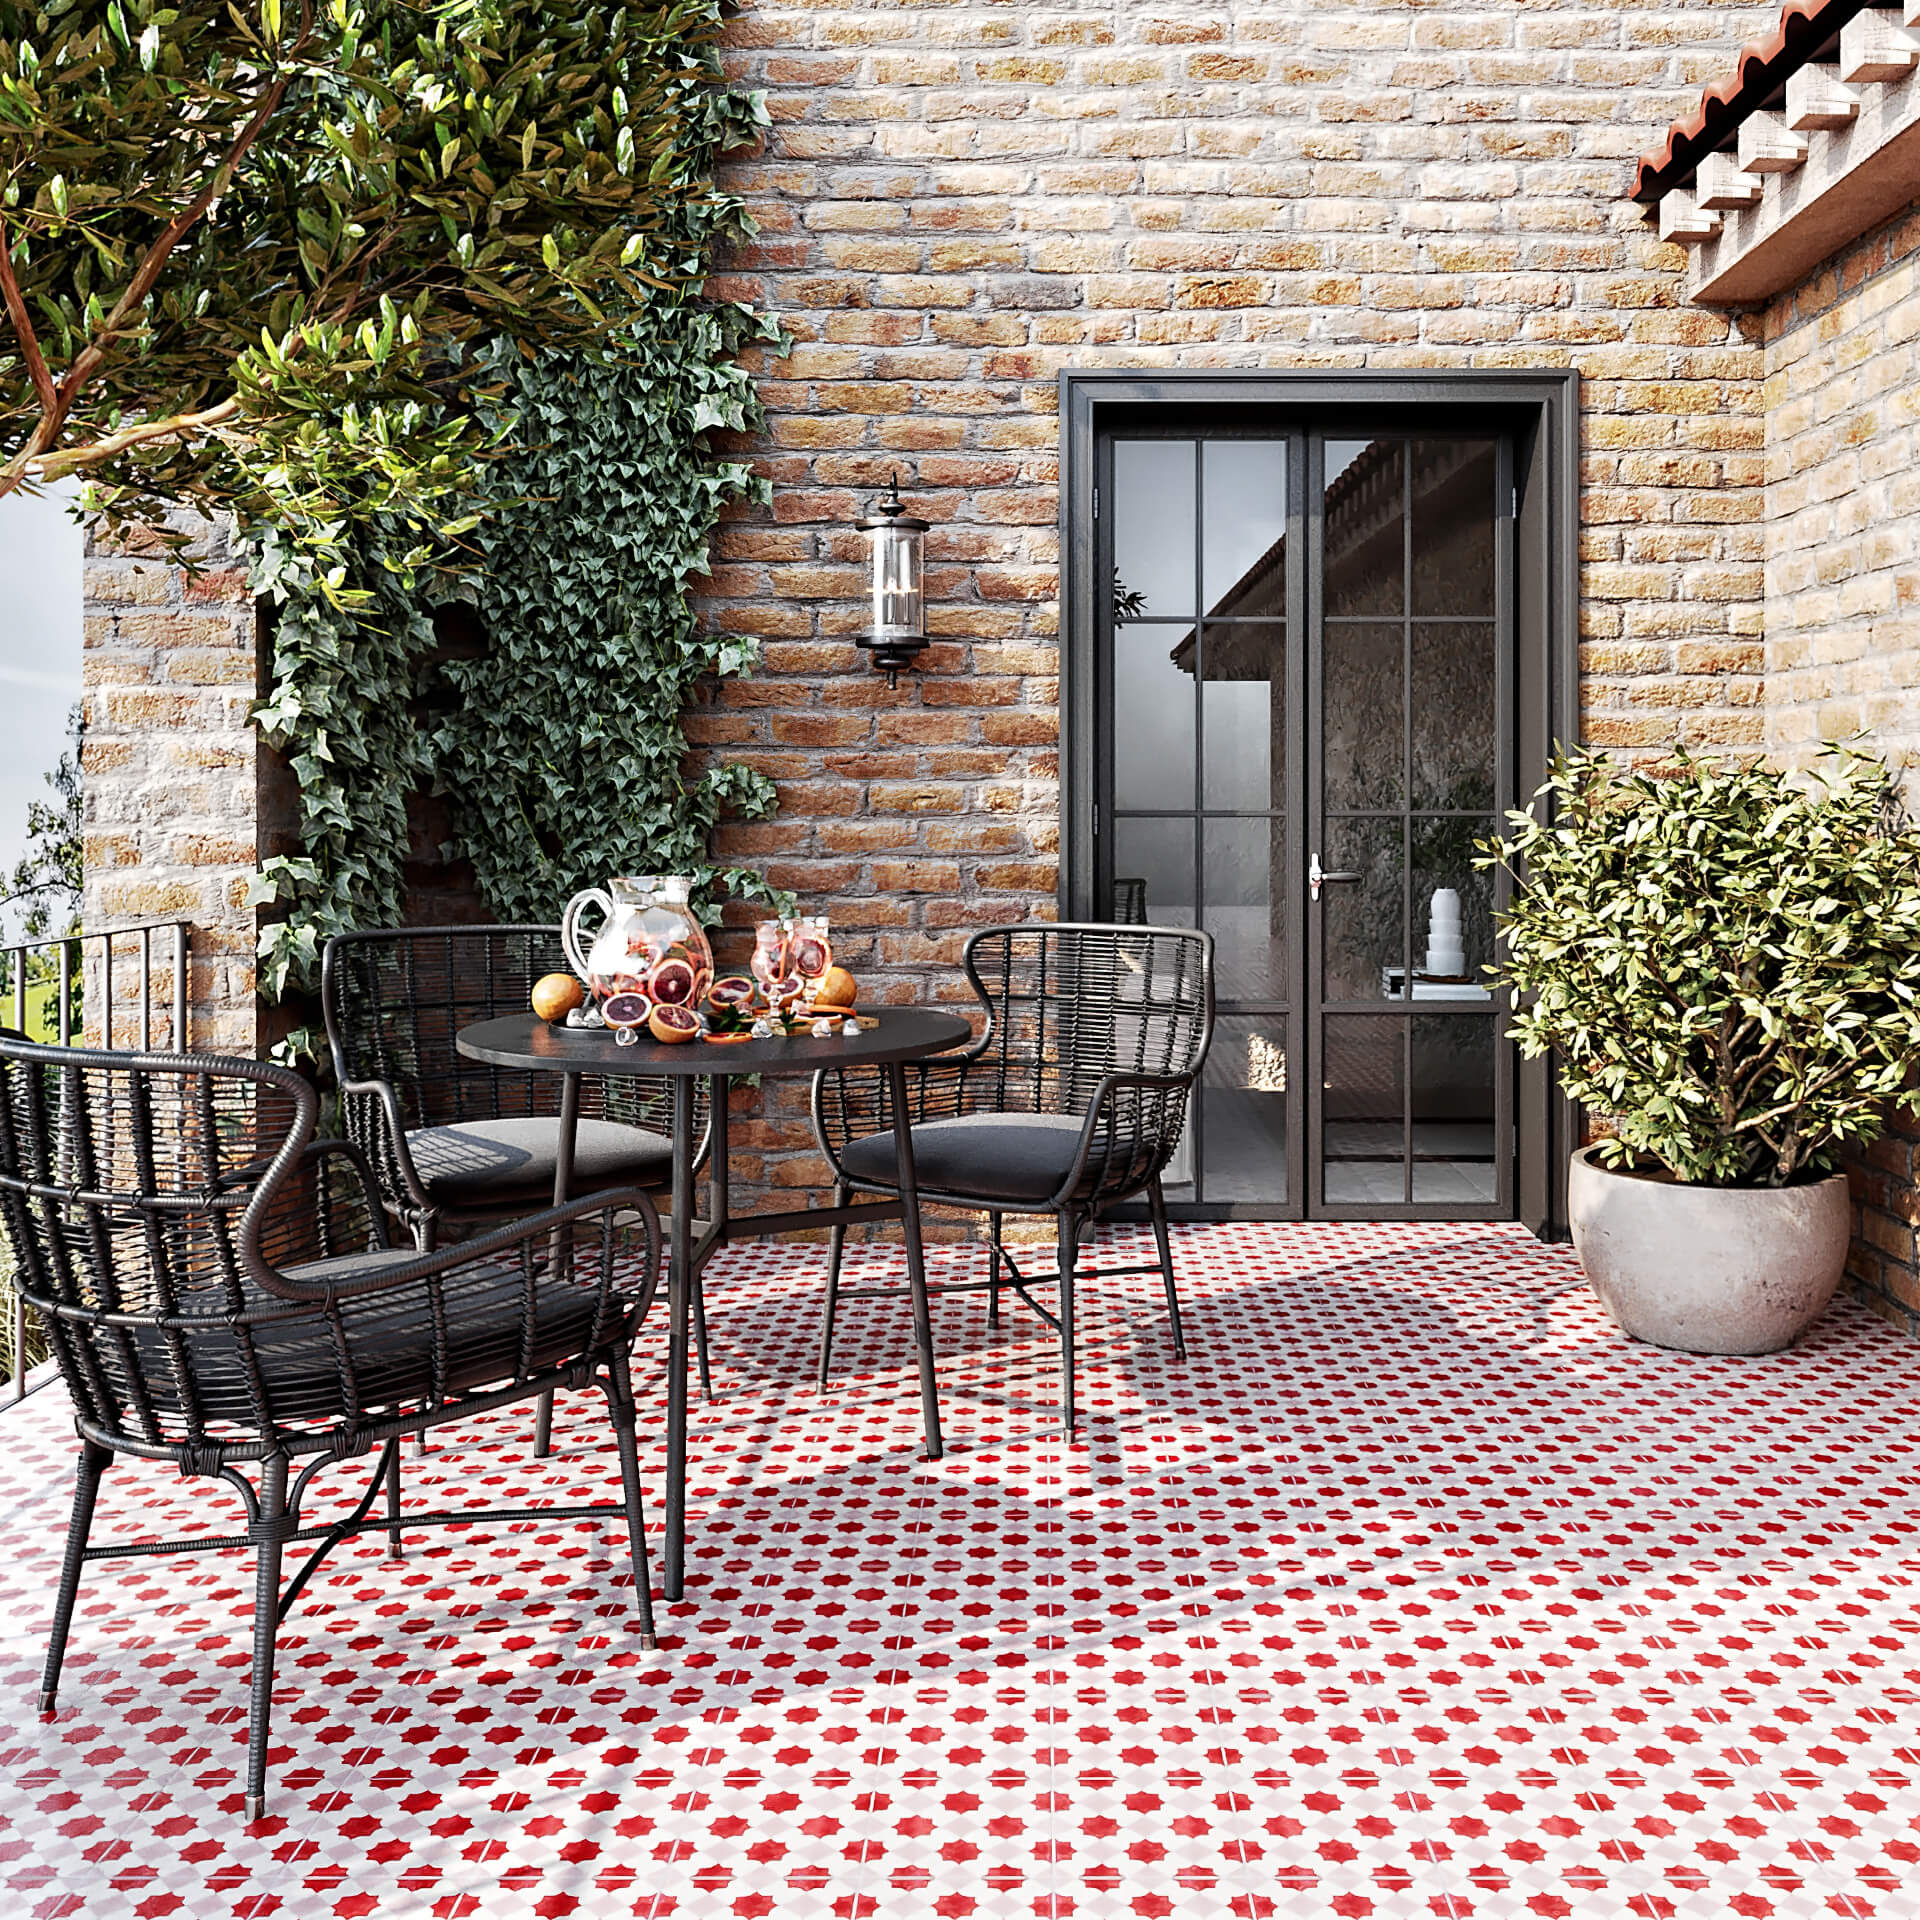 3D Rendering of Tiles on a Terrace